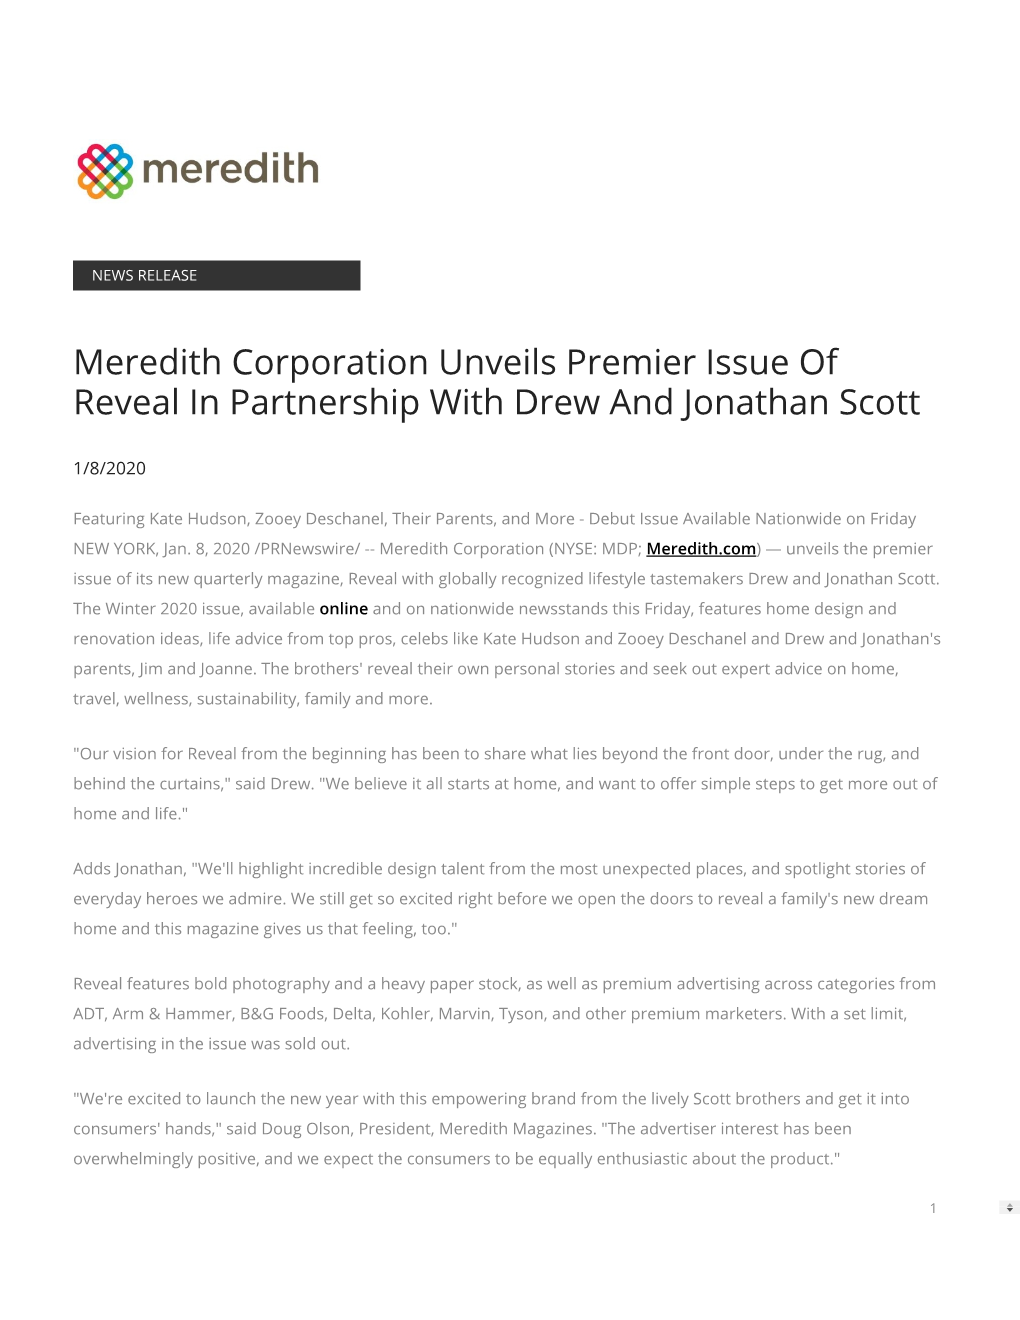 Meredith Corporation Unveils Premier Issue of Reveal in Partnership with Drew and Jonathan Scott